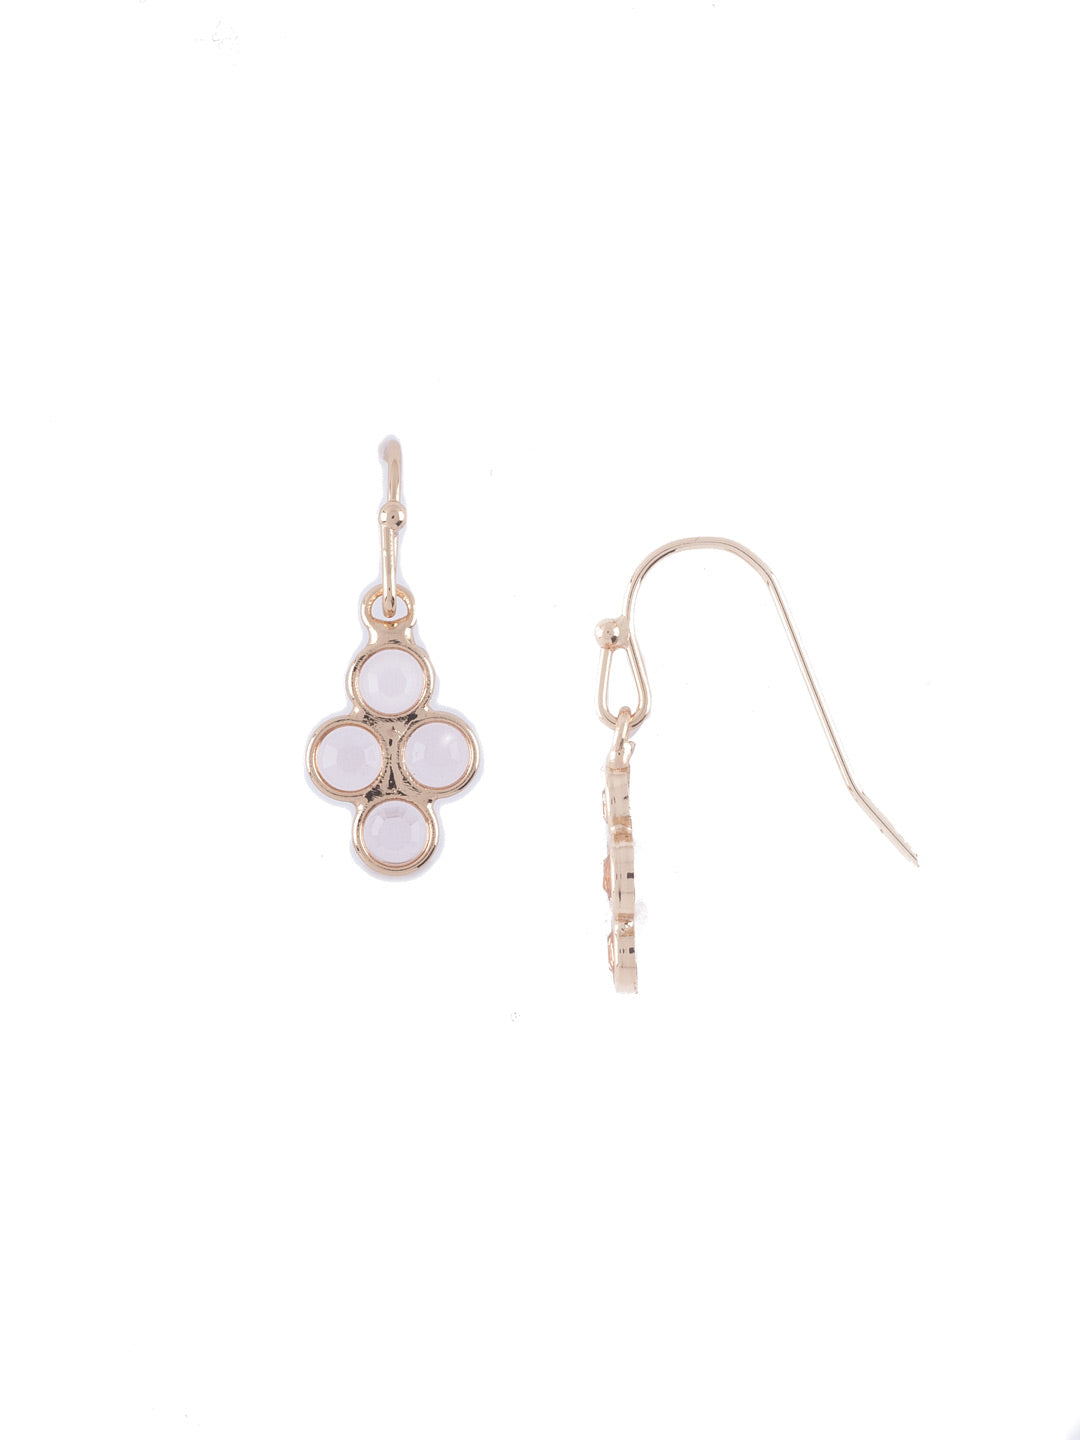 Aubrielle Dangle Earrings - EEP93BGSIL - The Aubrielle Dangle Earring has four clear crystals in a clover shape From Sorrelli's Silk collection in our Bright Gold-tone finish.